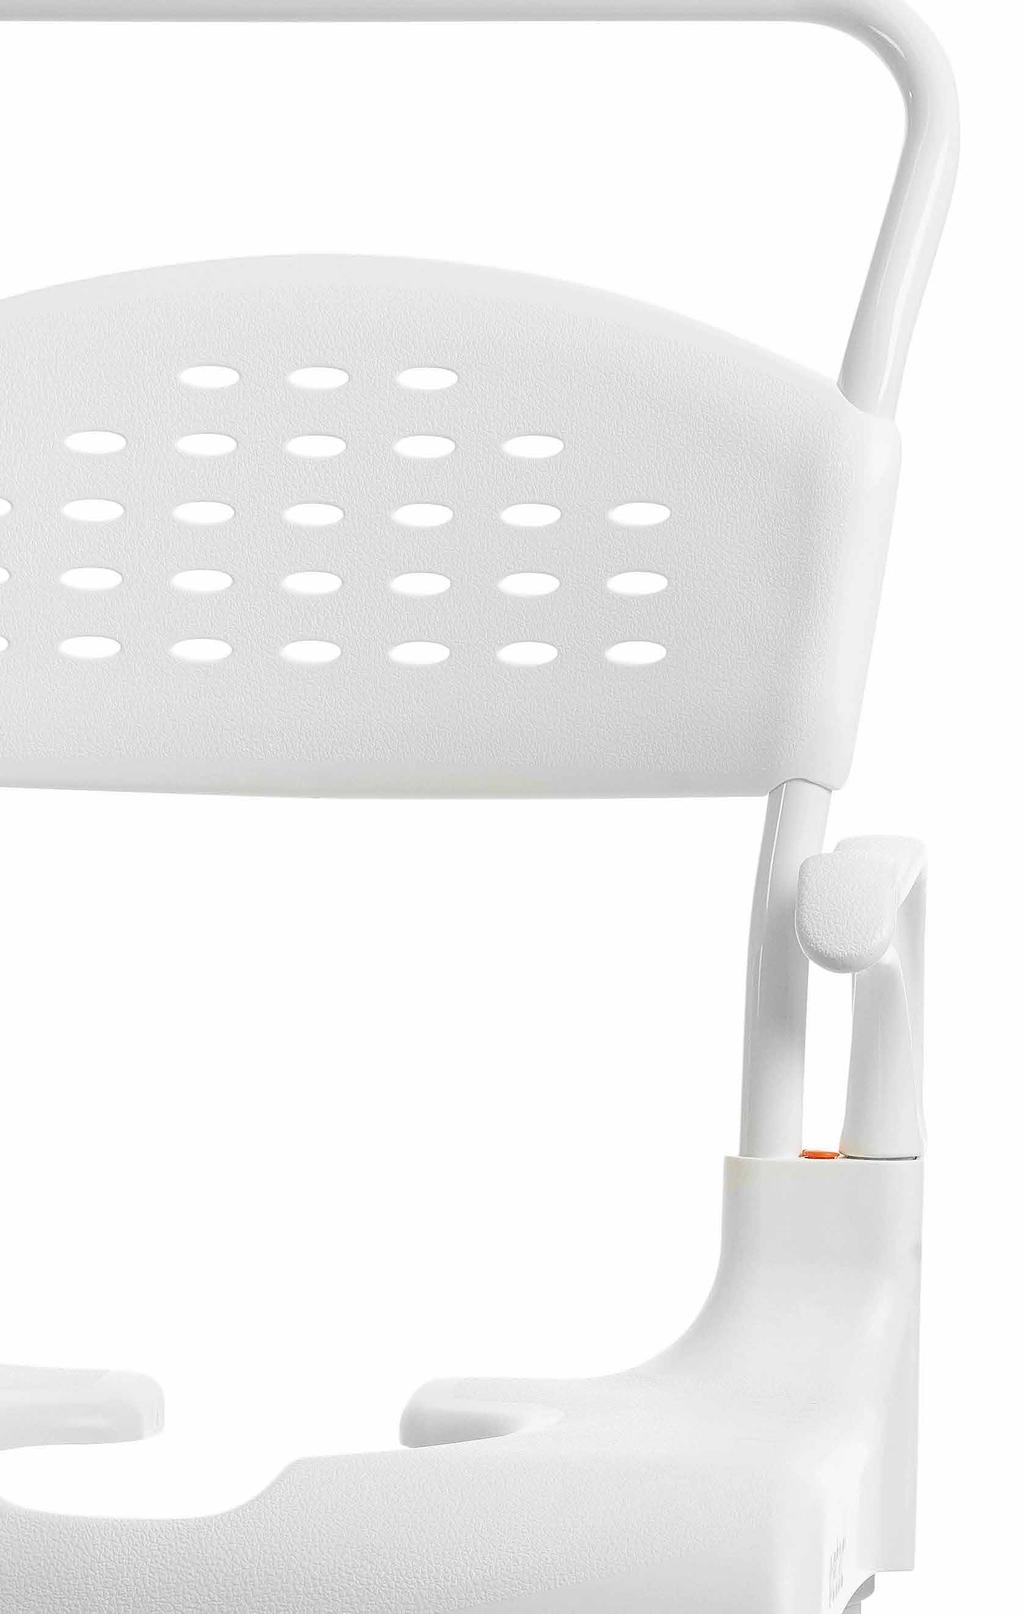 Etac Clean Height Adjustable shower commode chair In addition to all the features of the